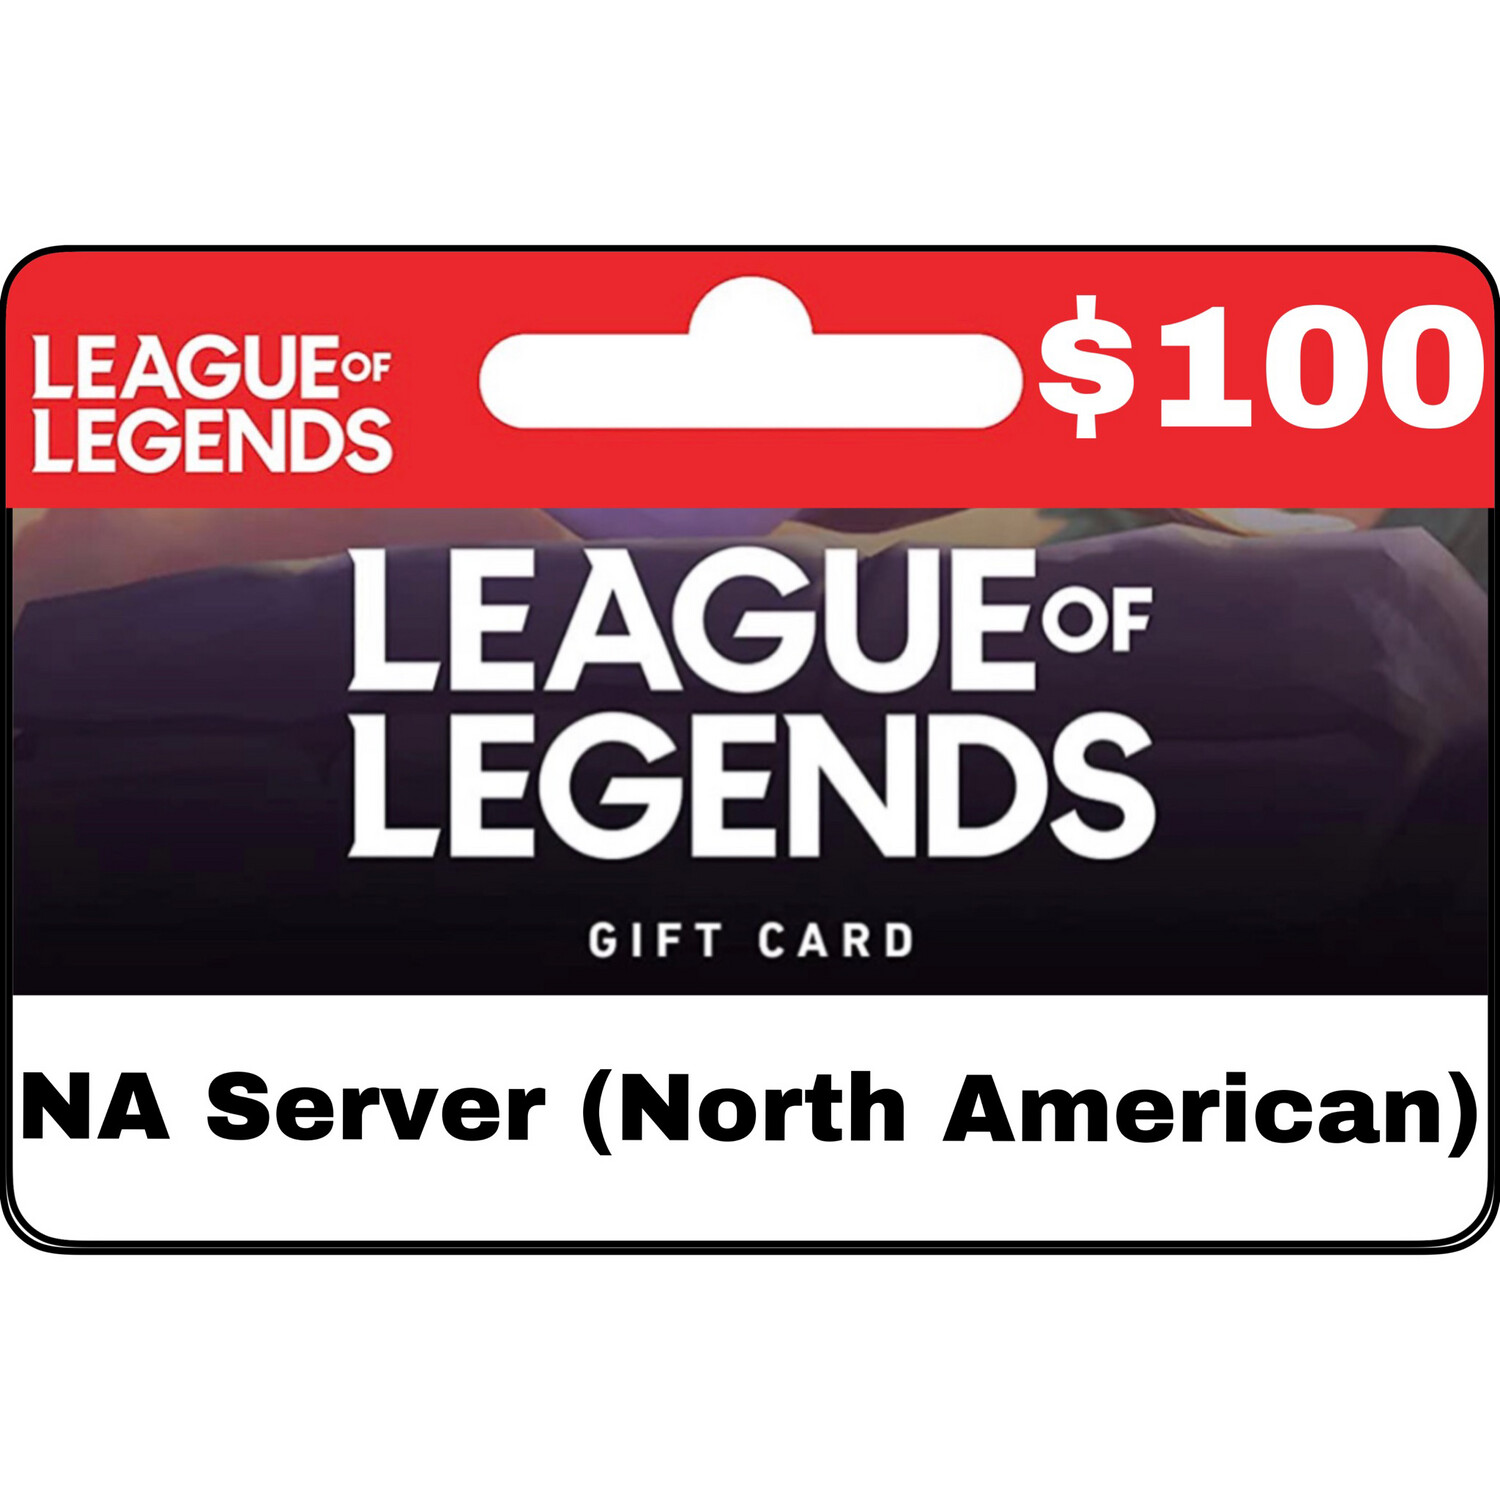 League of Legends USD $100 NA Server Gift Card